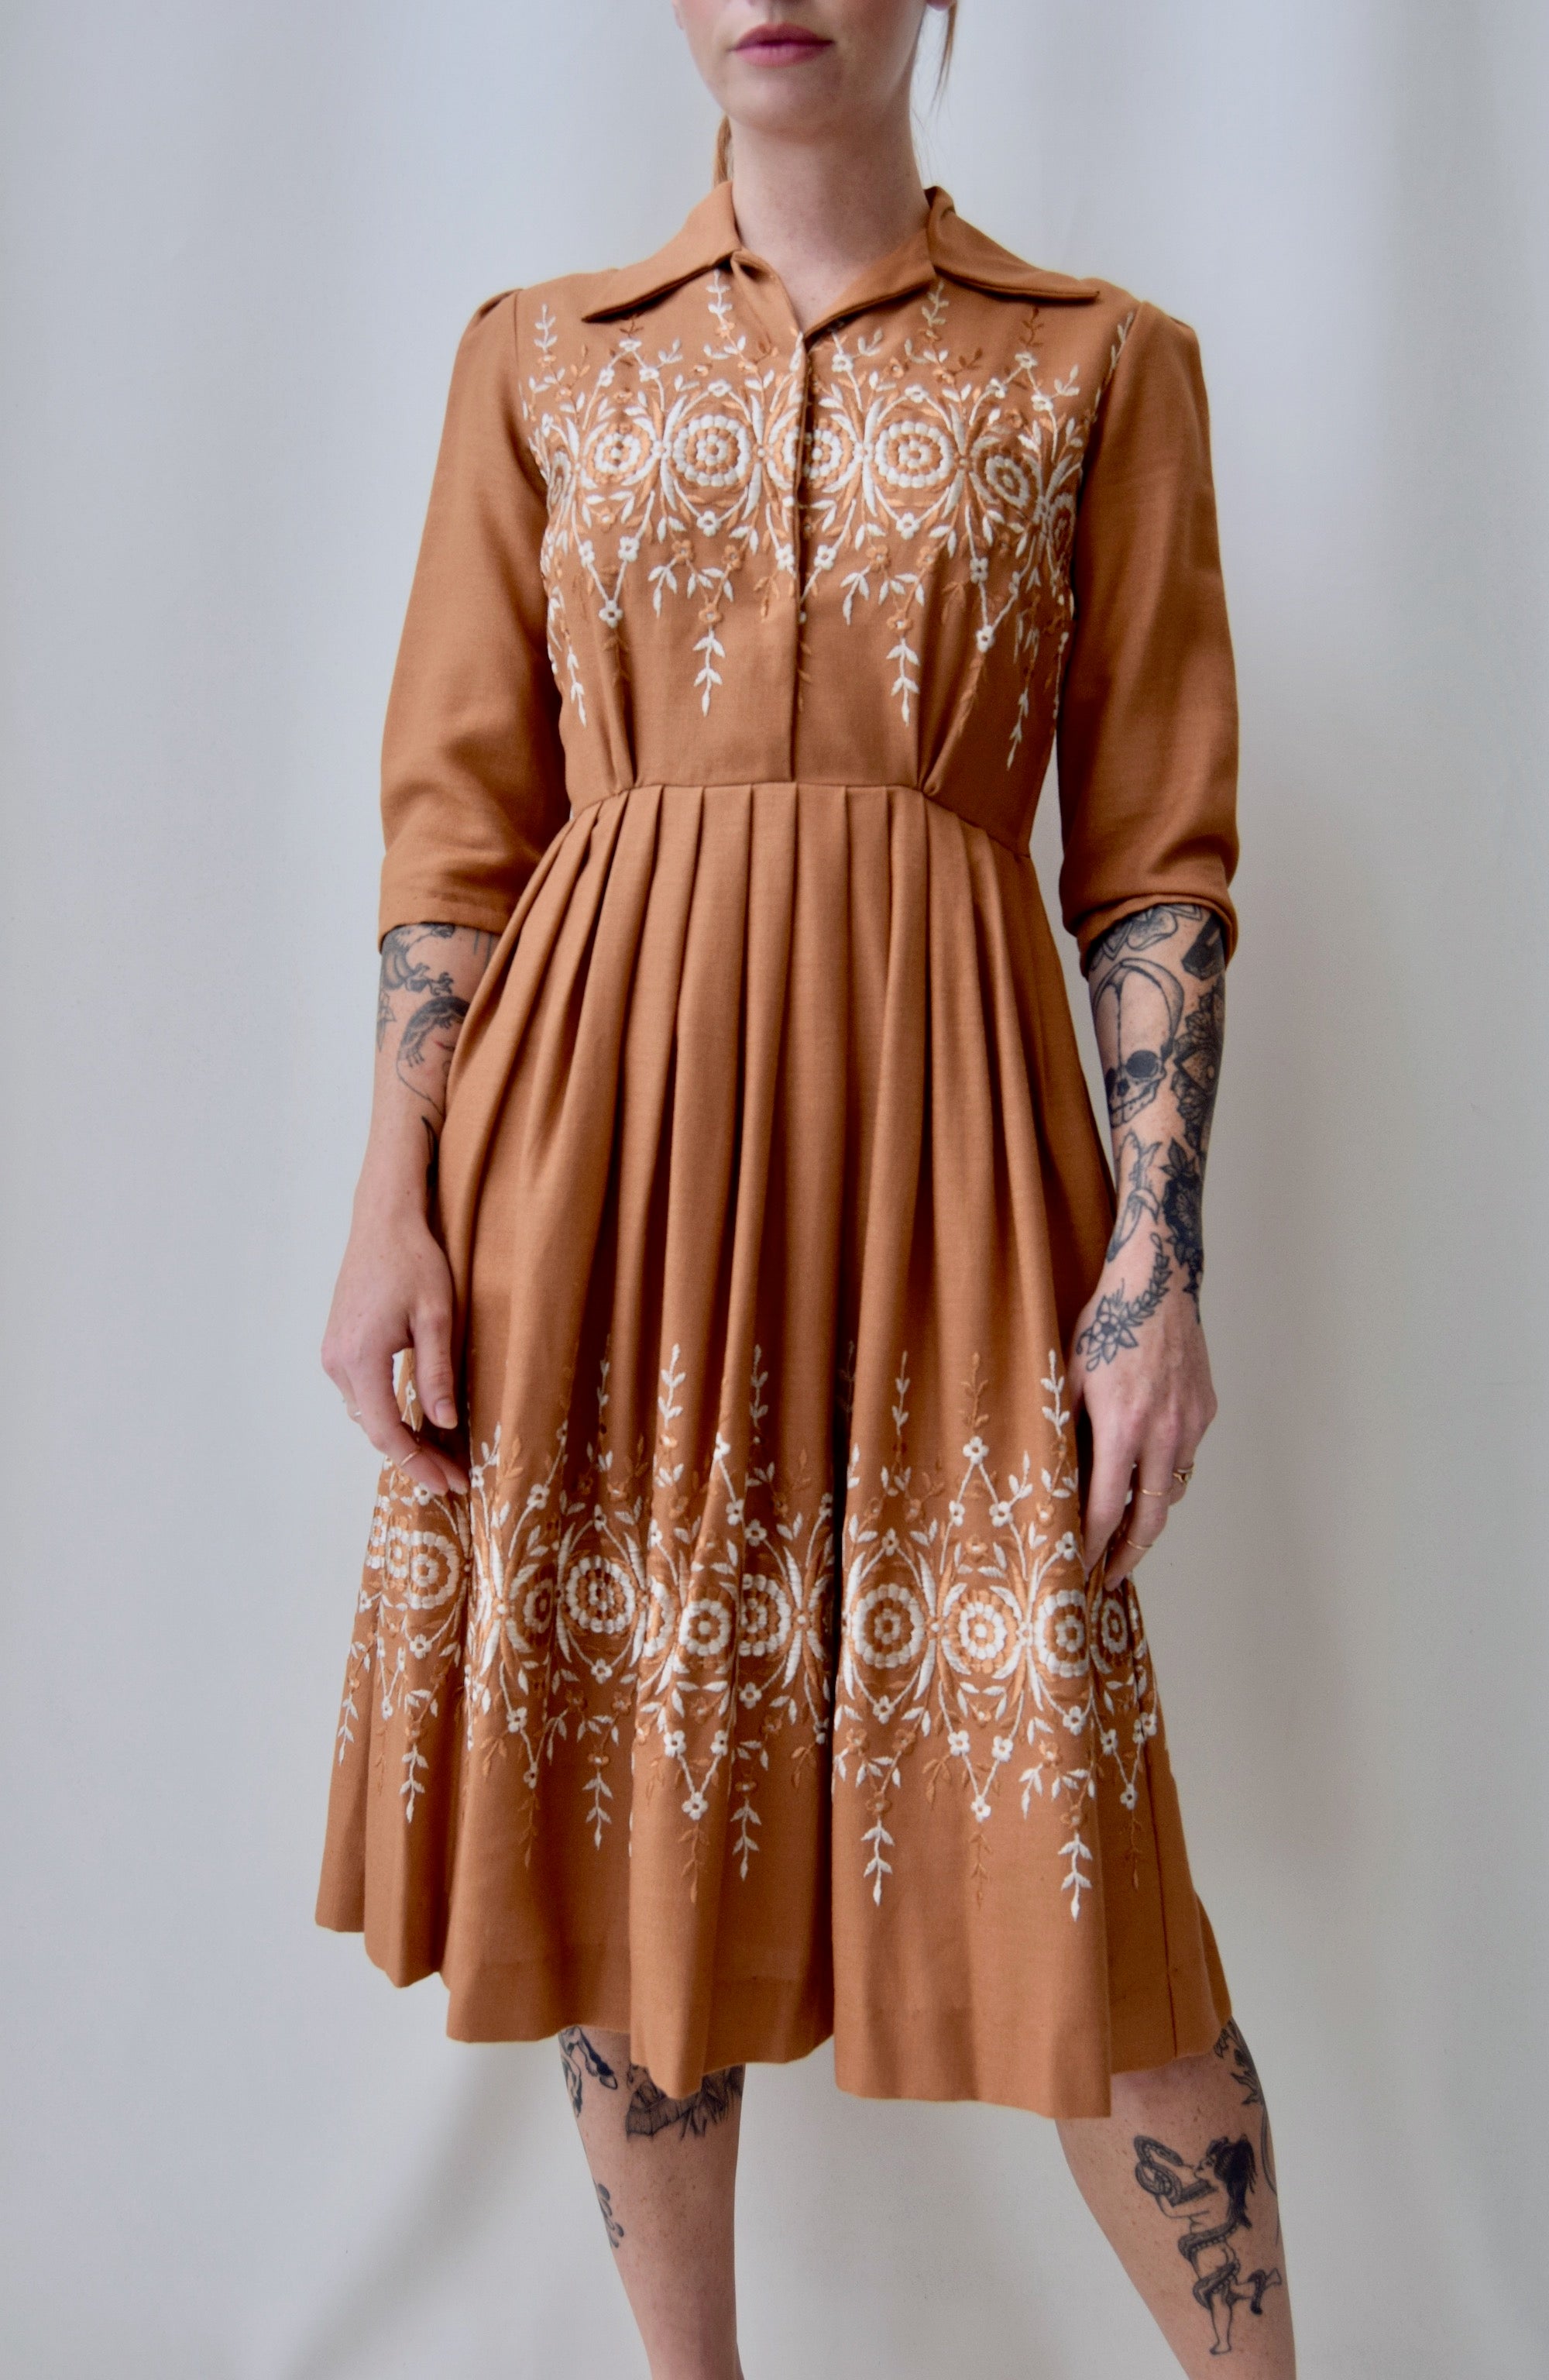 Vintage Embroidered Day Dress